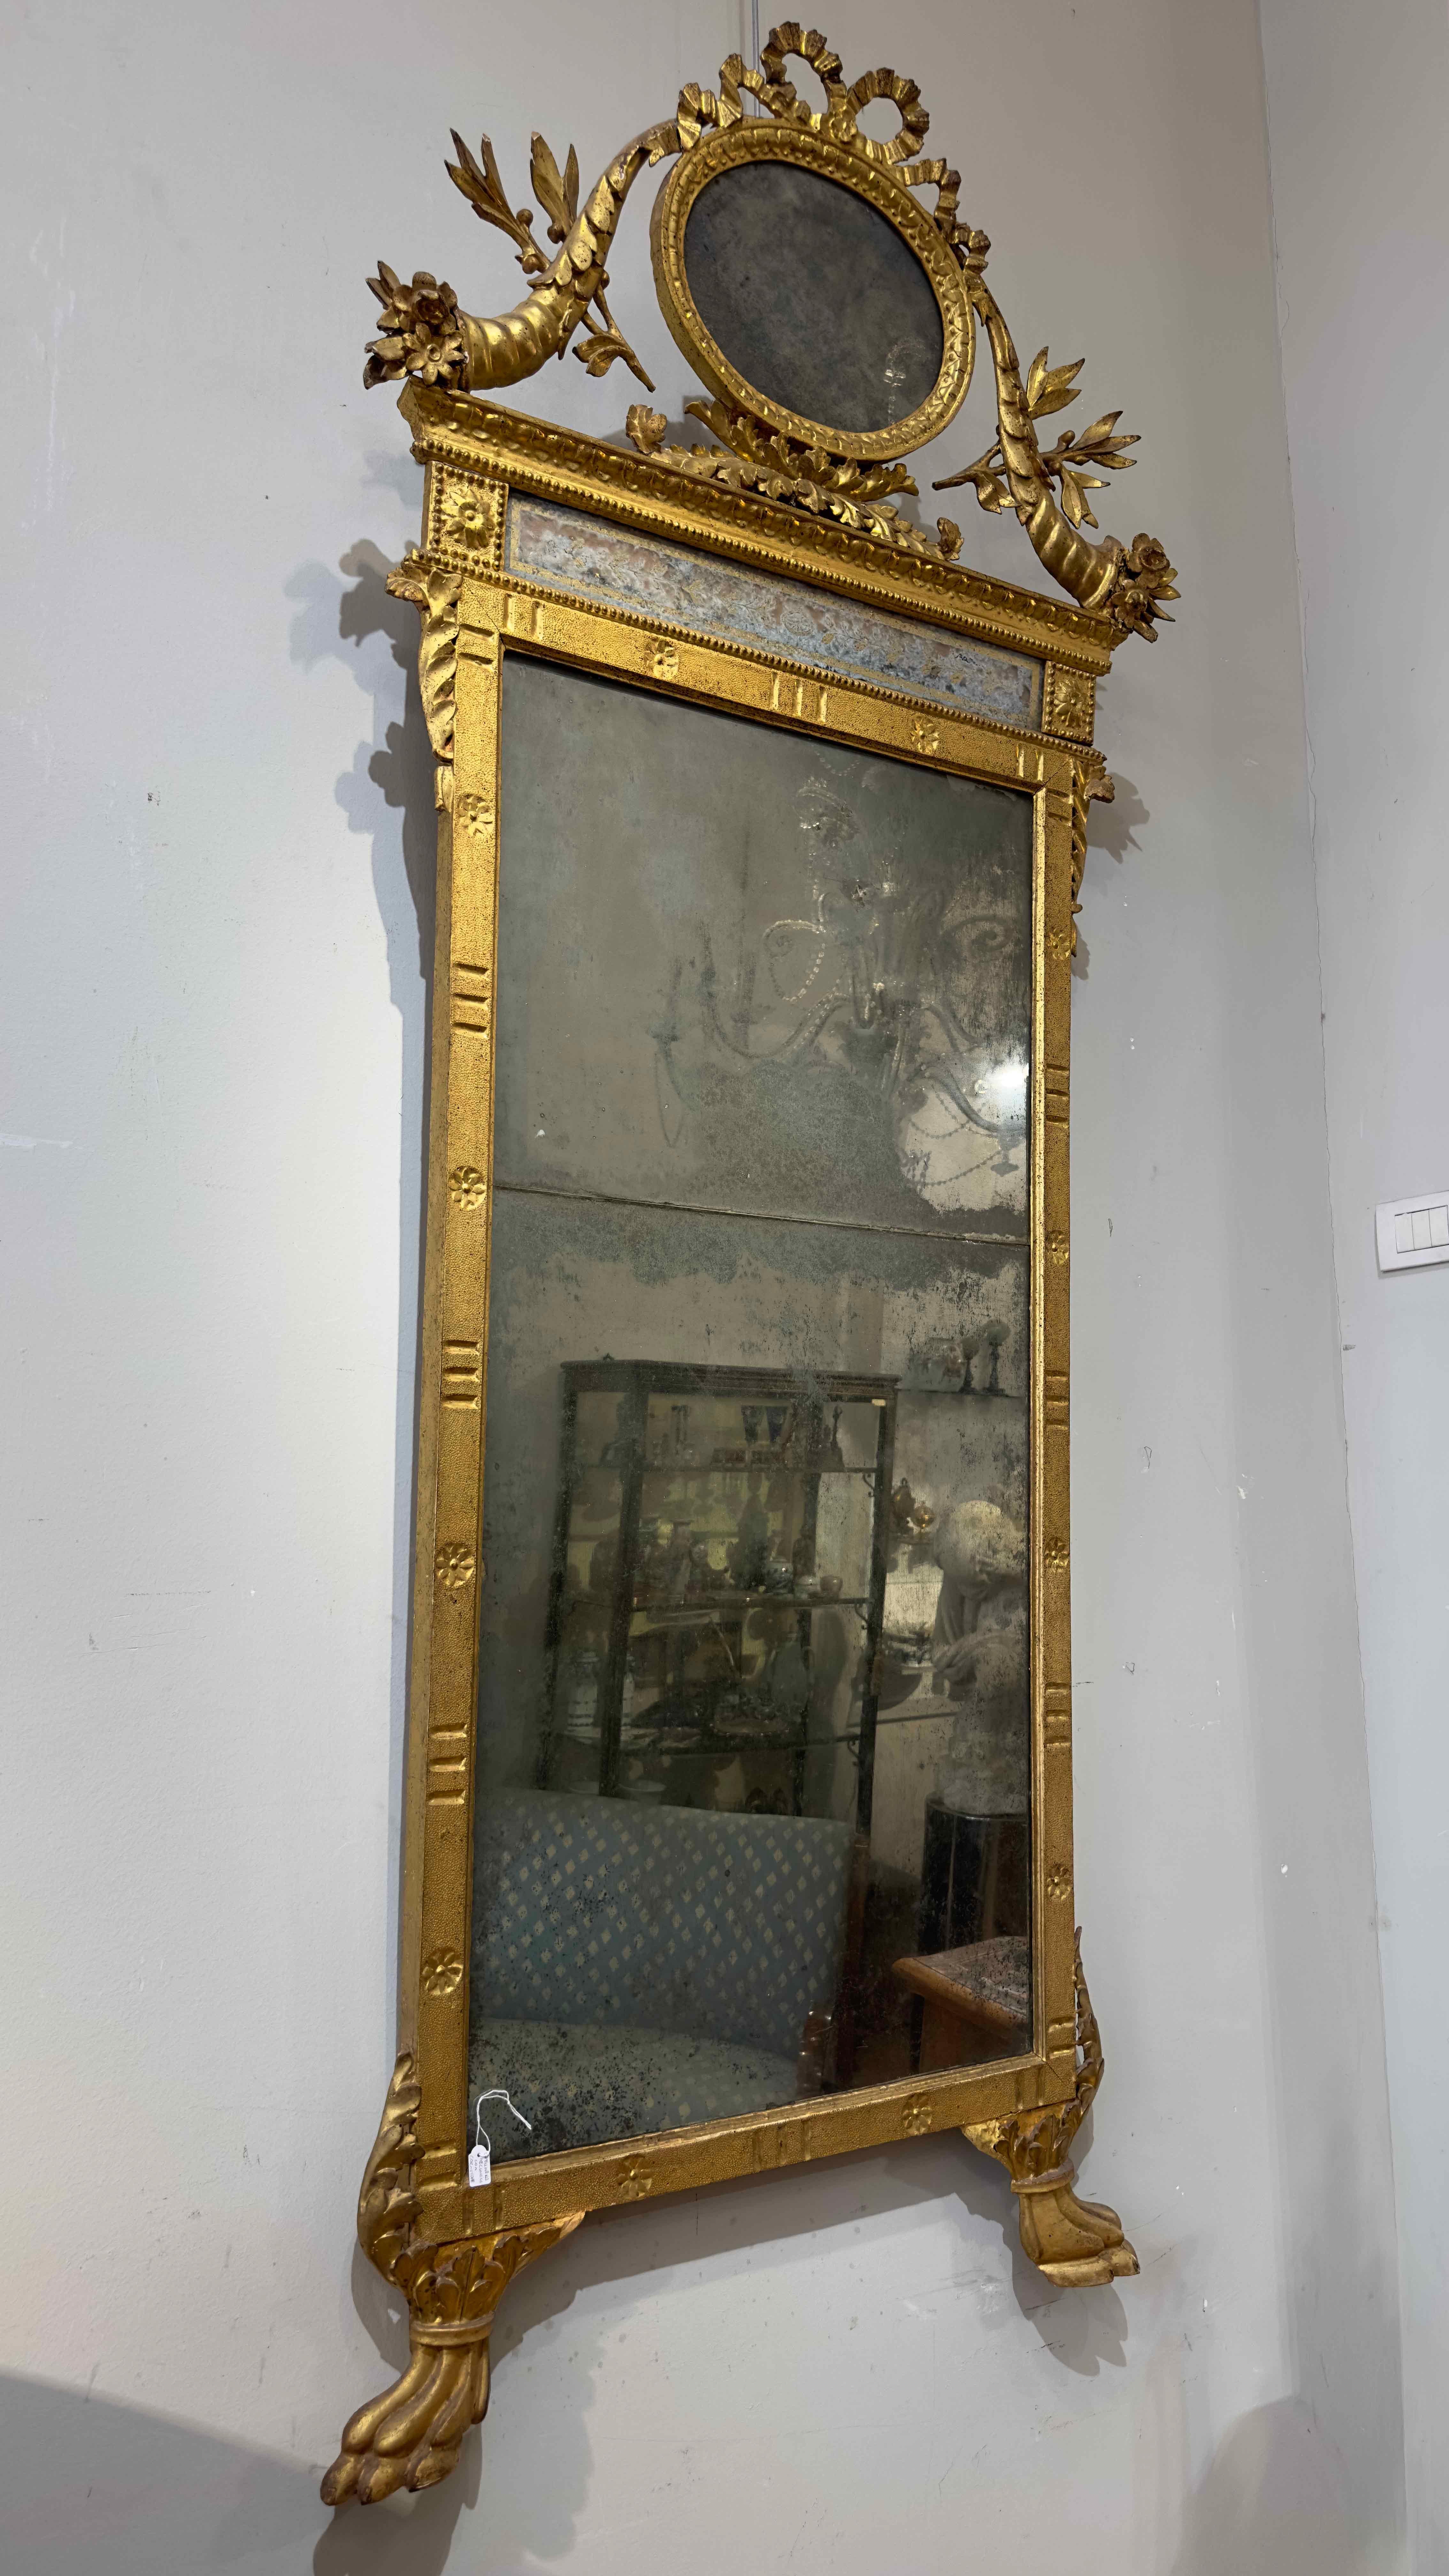 Louis XVI END OF THE 18th CENTURY NEOCLASSICAL MIRROR WITH CORNUCOPIAS AND OLIVE BRANCHES 